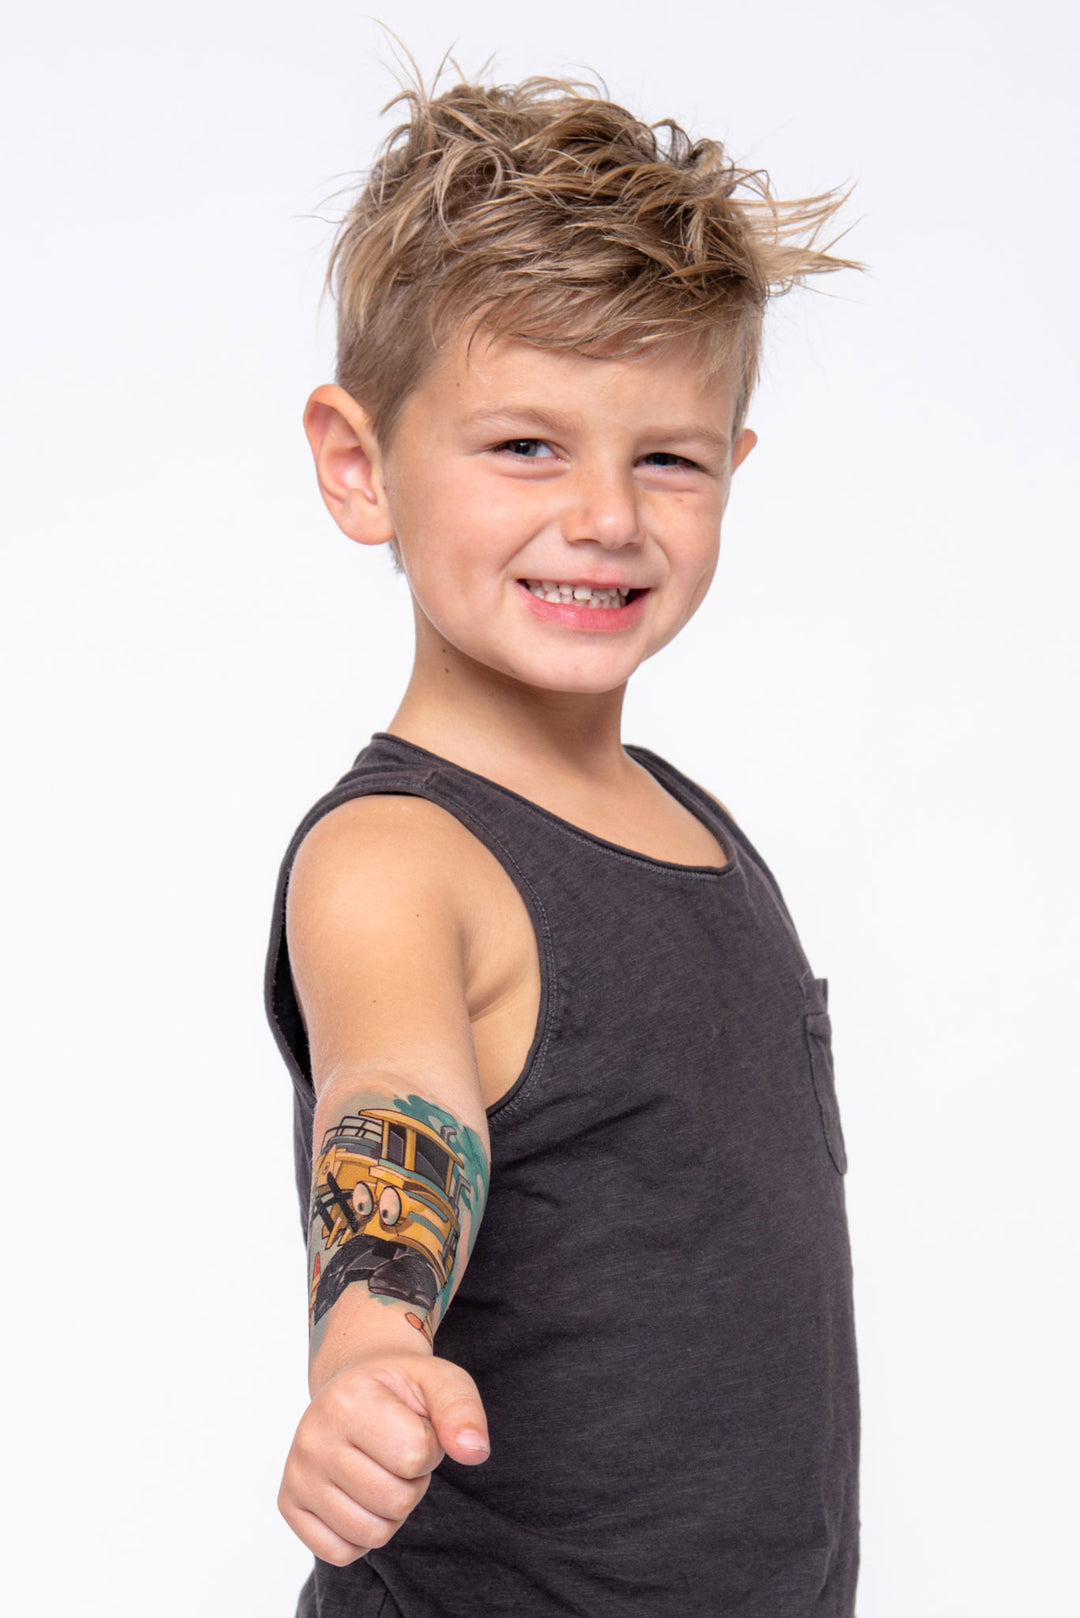 Young boy shows off his forearm temporary tattoo sleeve with construction equipment.